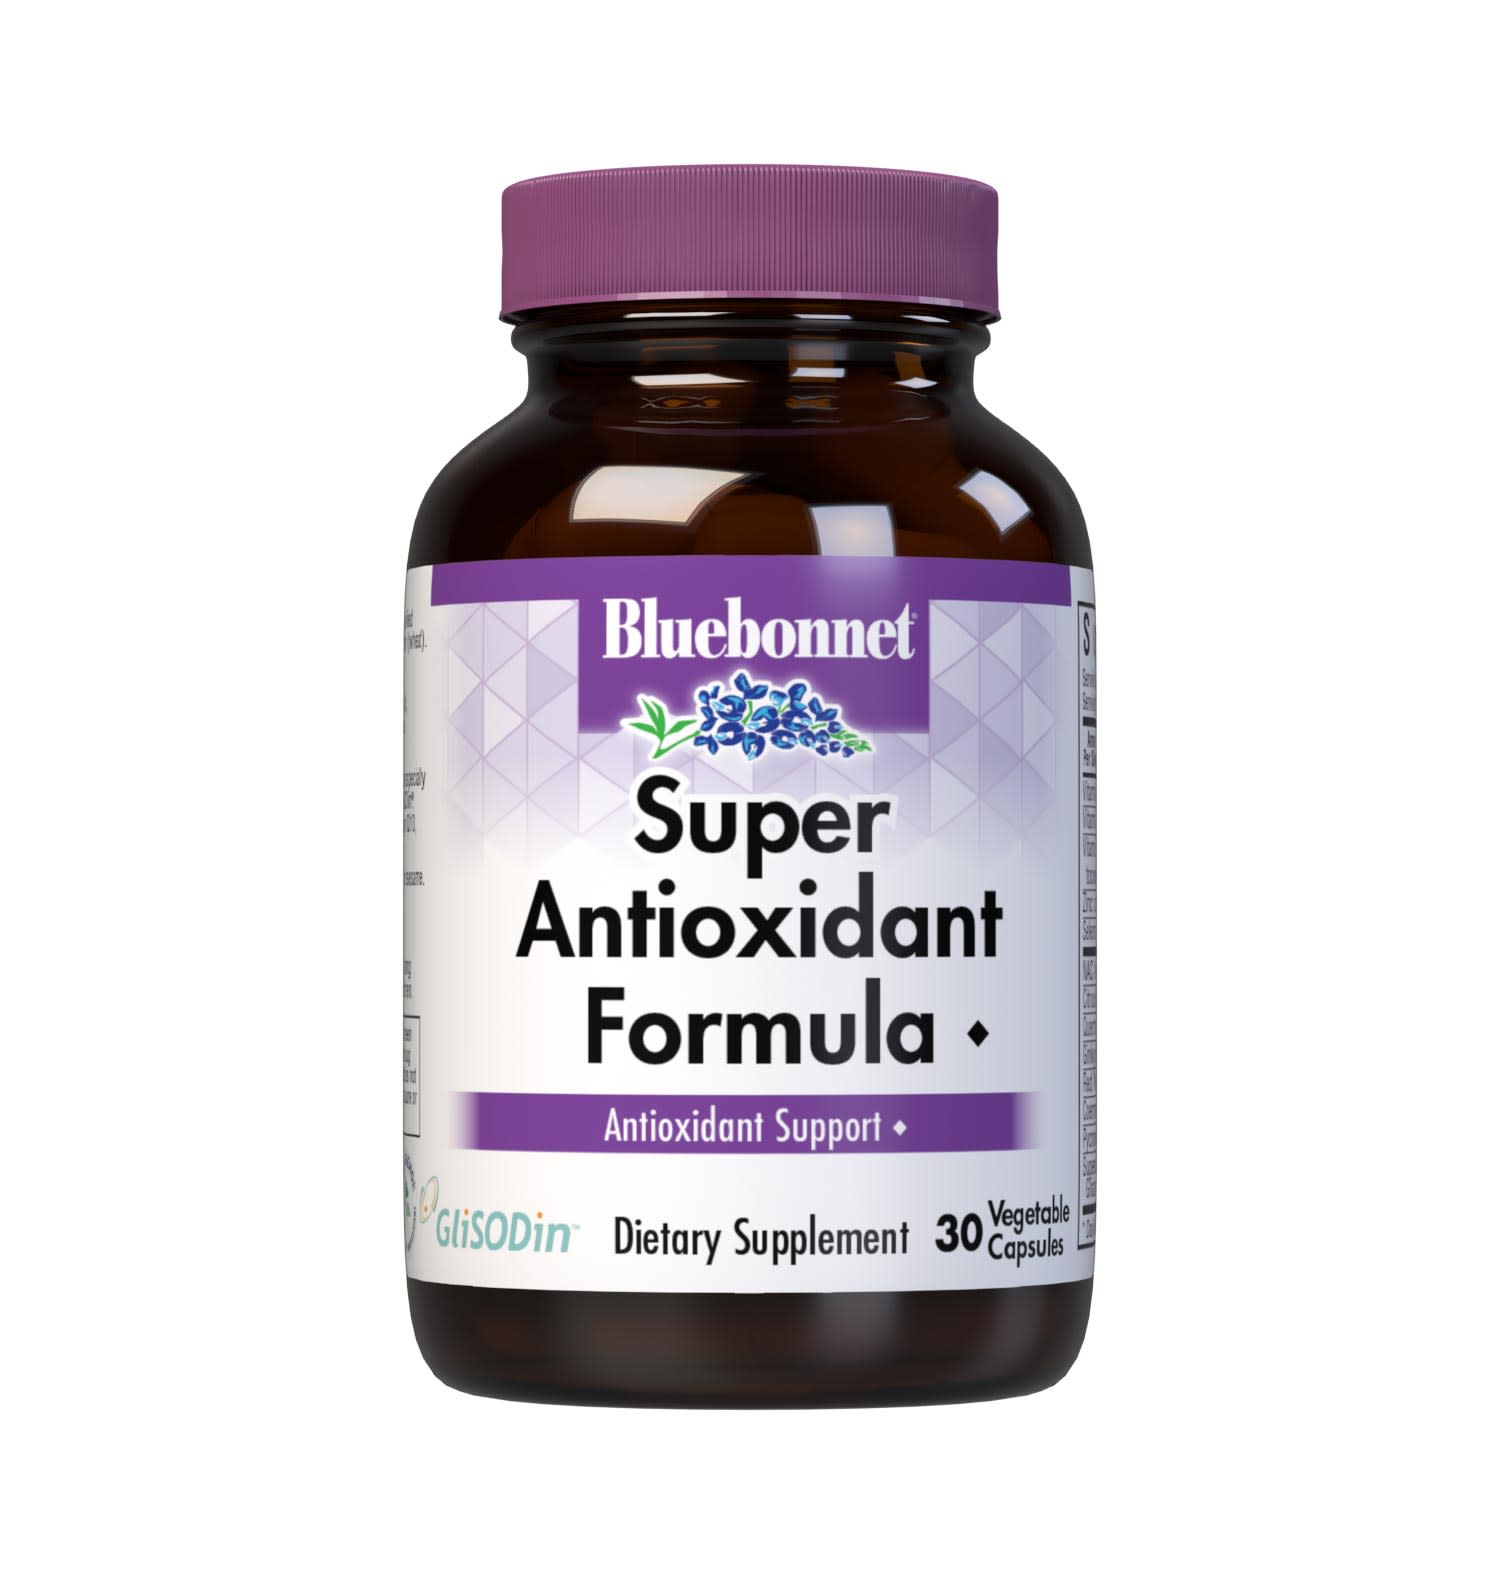 Bluebonnet’s Super Antioxidant Formula 30 Vegetable Capsules are specially formulated with a full range of potent antioxidants, including GliSODin, the first vegetarian form of SOD from cantaloupe melon, and coenzyme Q10, Pycnogenol, red wine polyphenols and N-acetyl-L-cysteine. #size_30 count